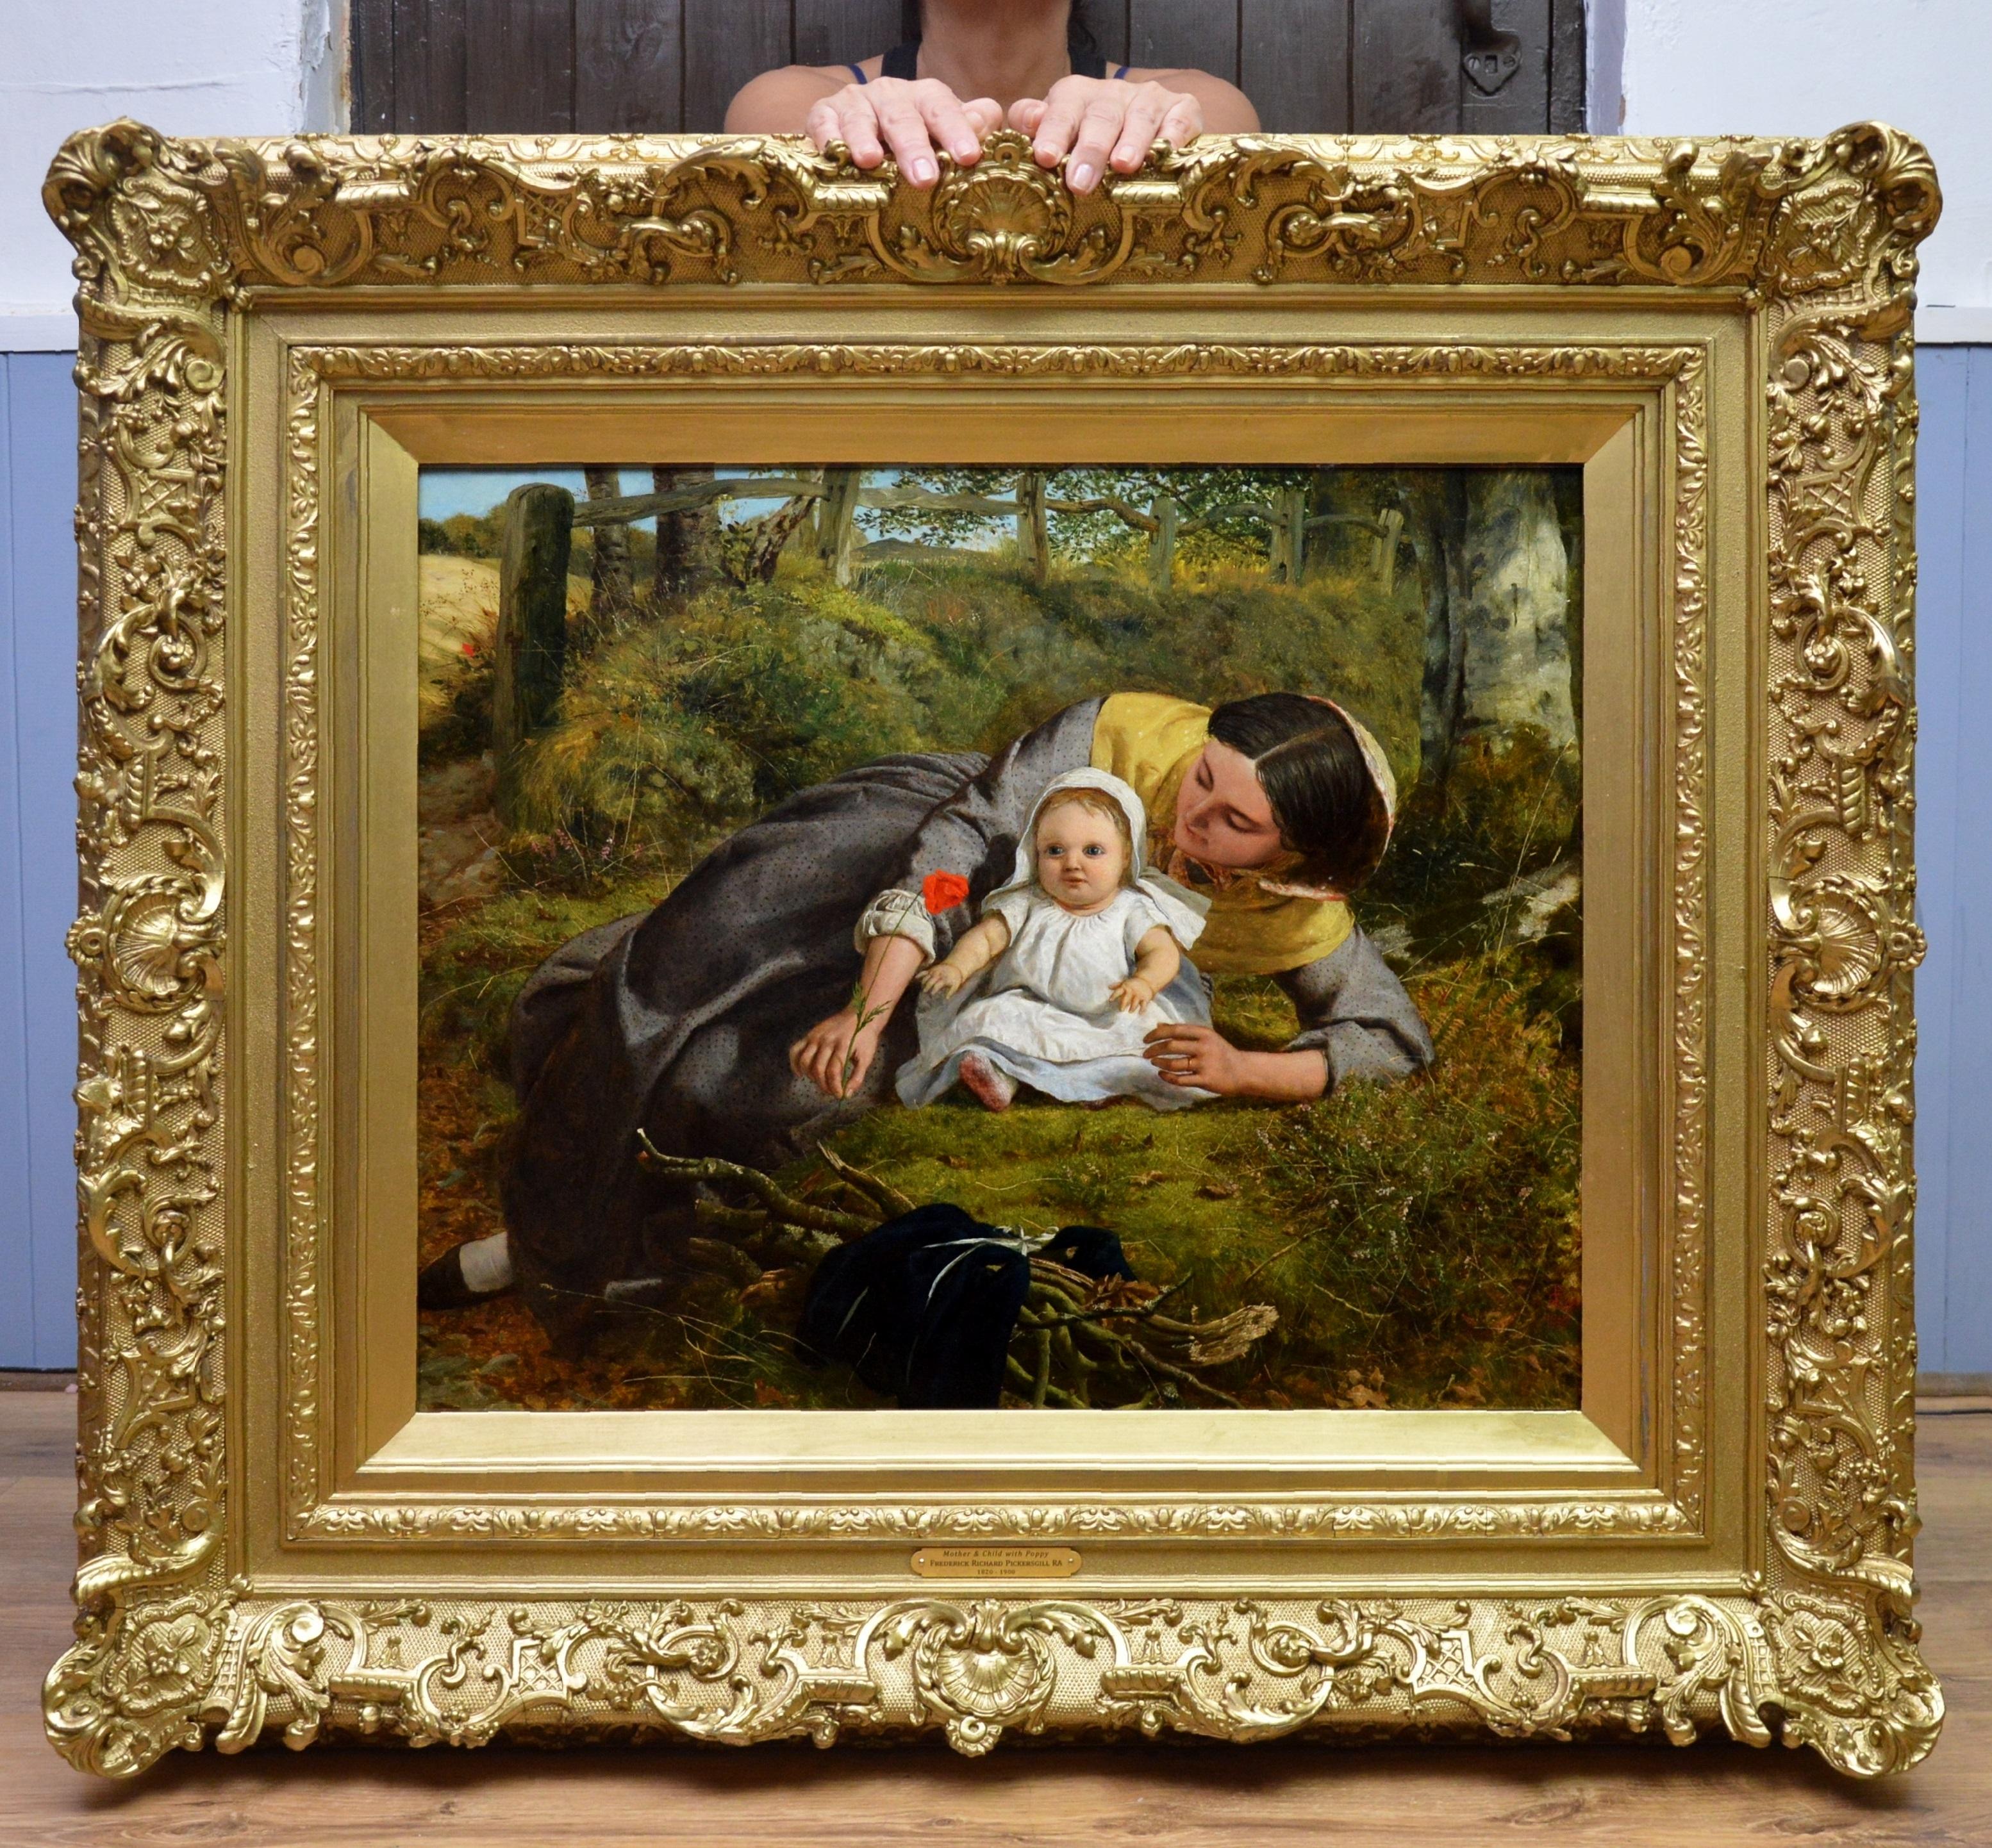 Mother & Child with Poppy - Mid 19th Century PreRaphaelite Oil Painting - 1862 - Brown Figurative Painting by Frederick Richard Pickersgill